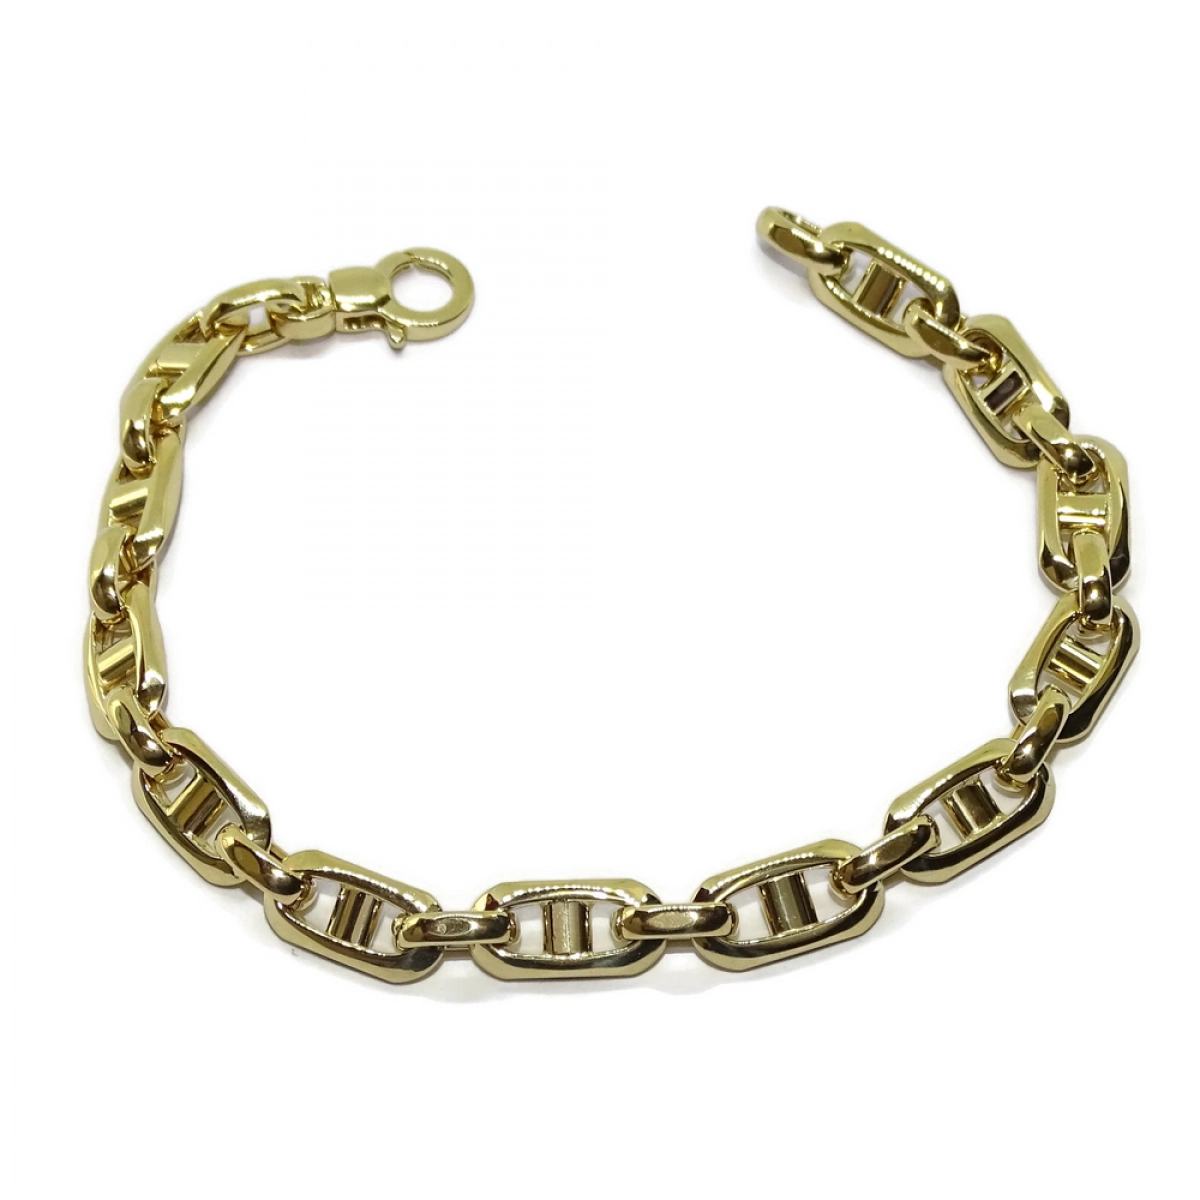 BRACELET ULSERA OF 18K YELLOW GOLD FOR MAN MODEL FORCED WITH BAR VERY LARGE, HOLLOW, 21.50 CM NEVER SAY NEVER